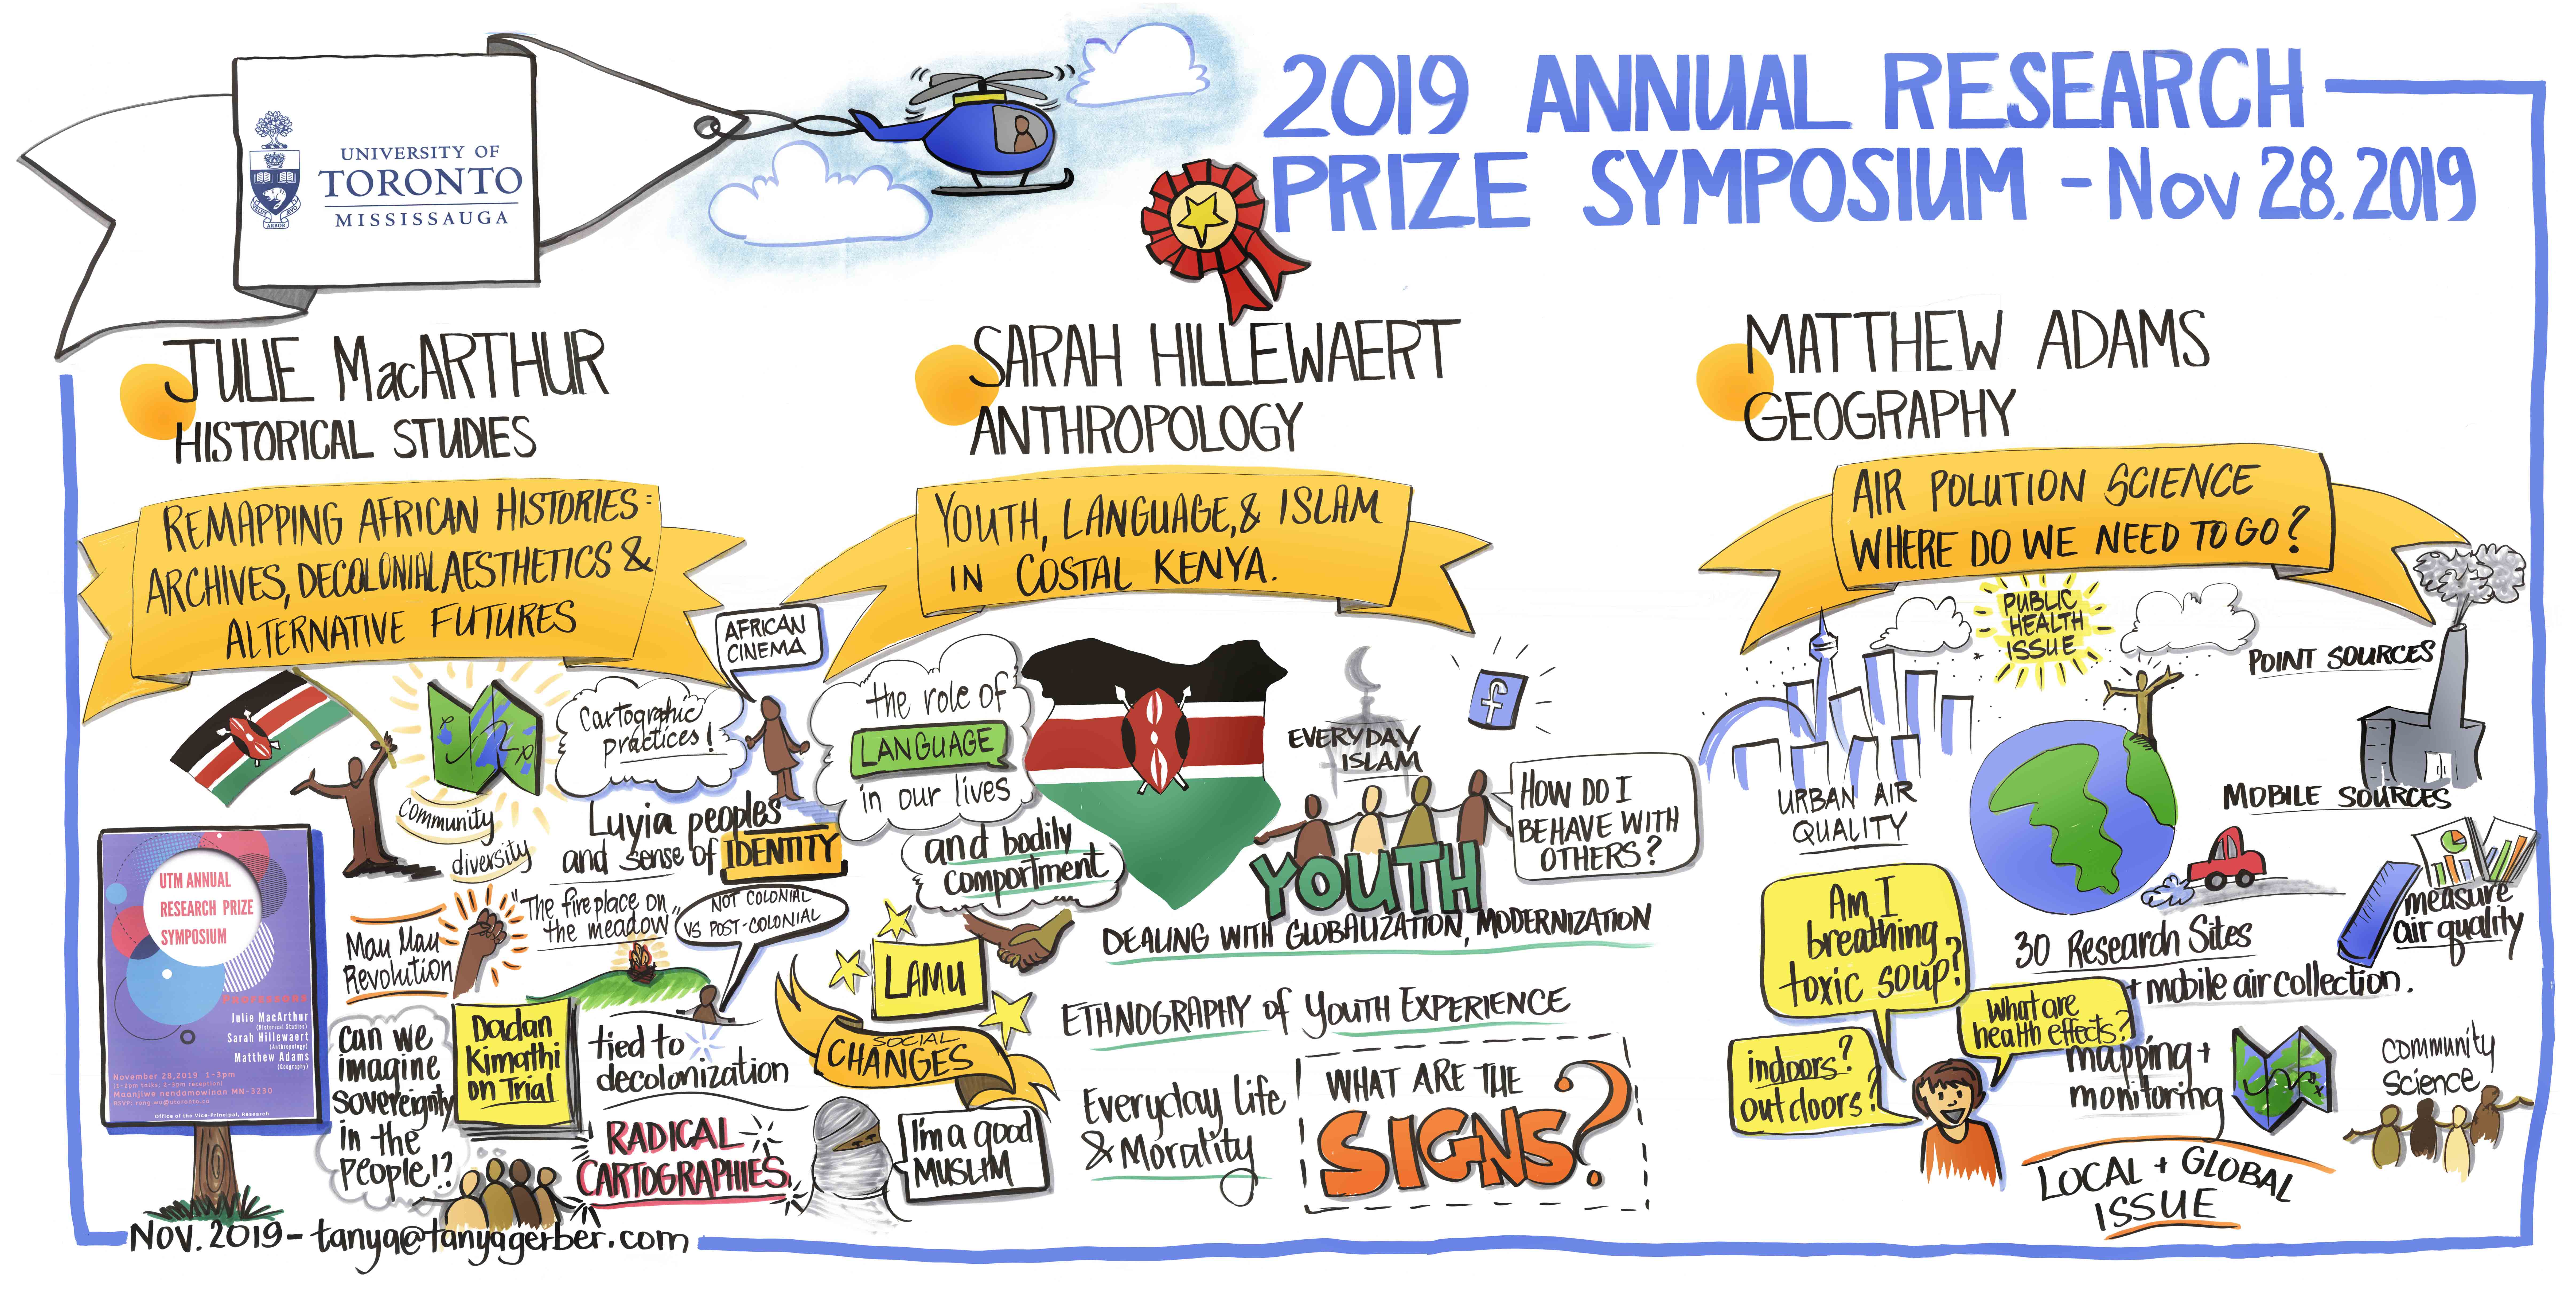 TanyaGerber UTM Research Prize Symposium 2019 small